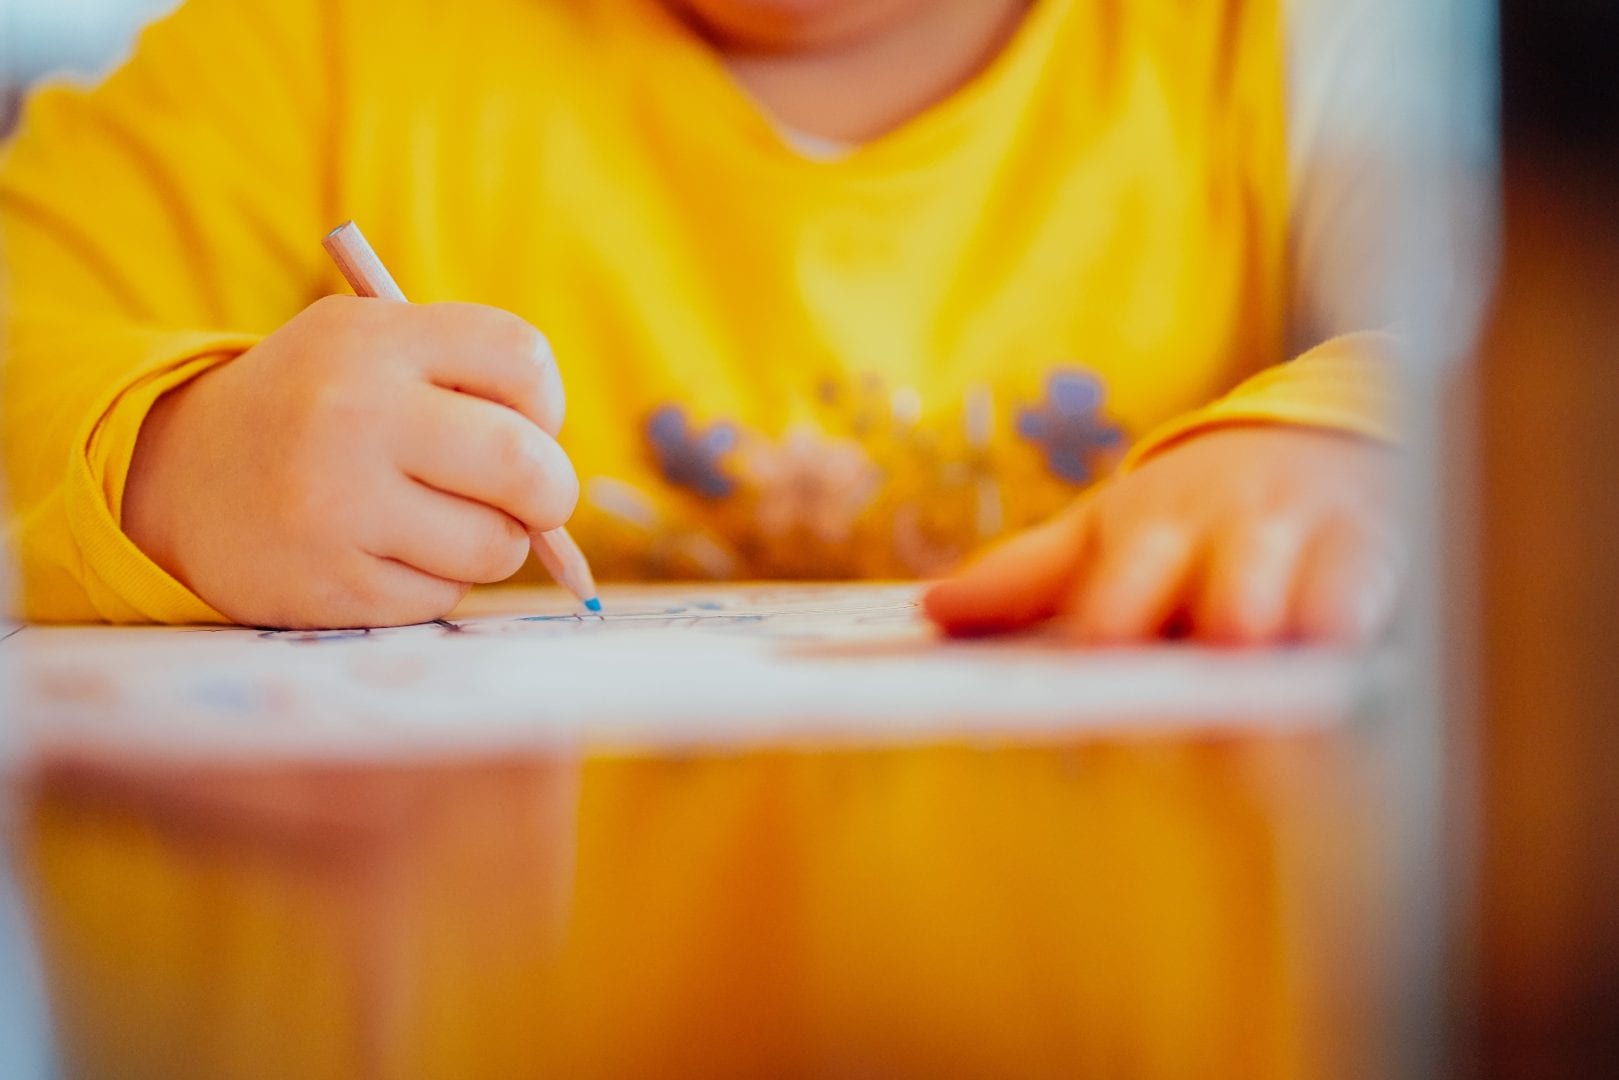 a kid in a yellow shirt coloring with a blue colored pencil